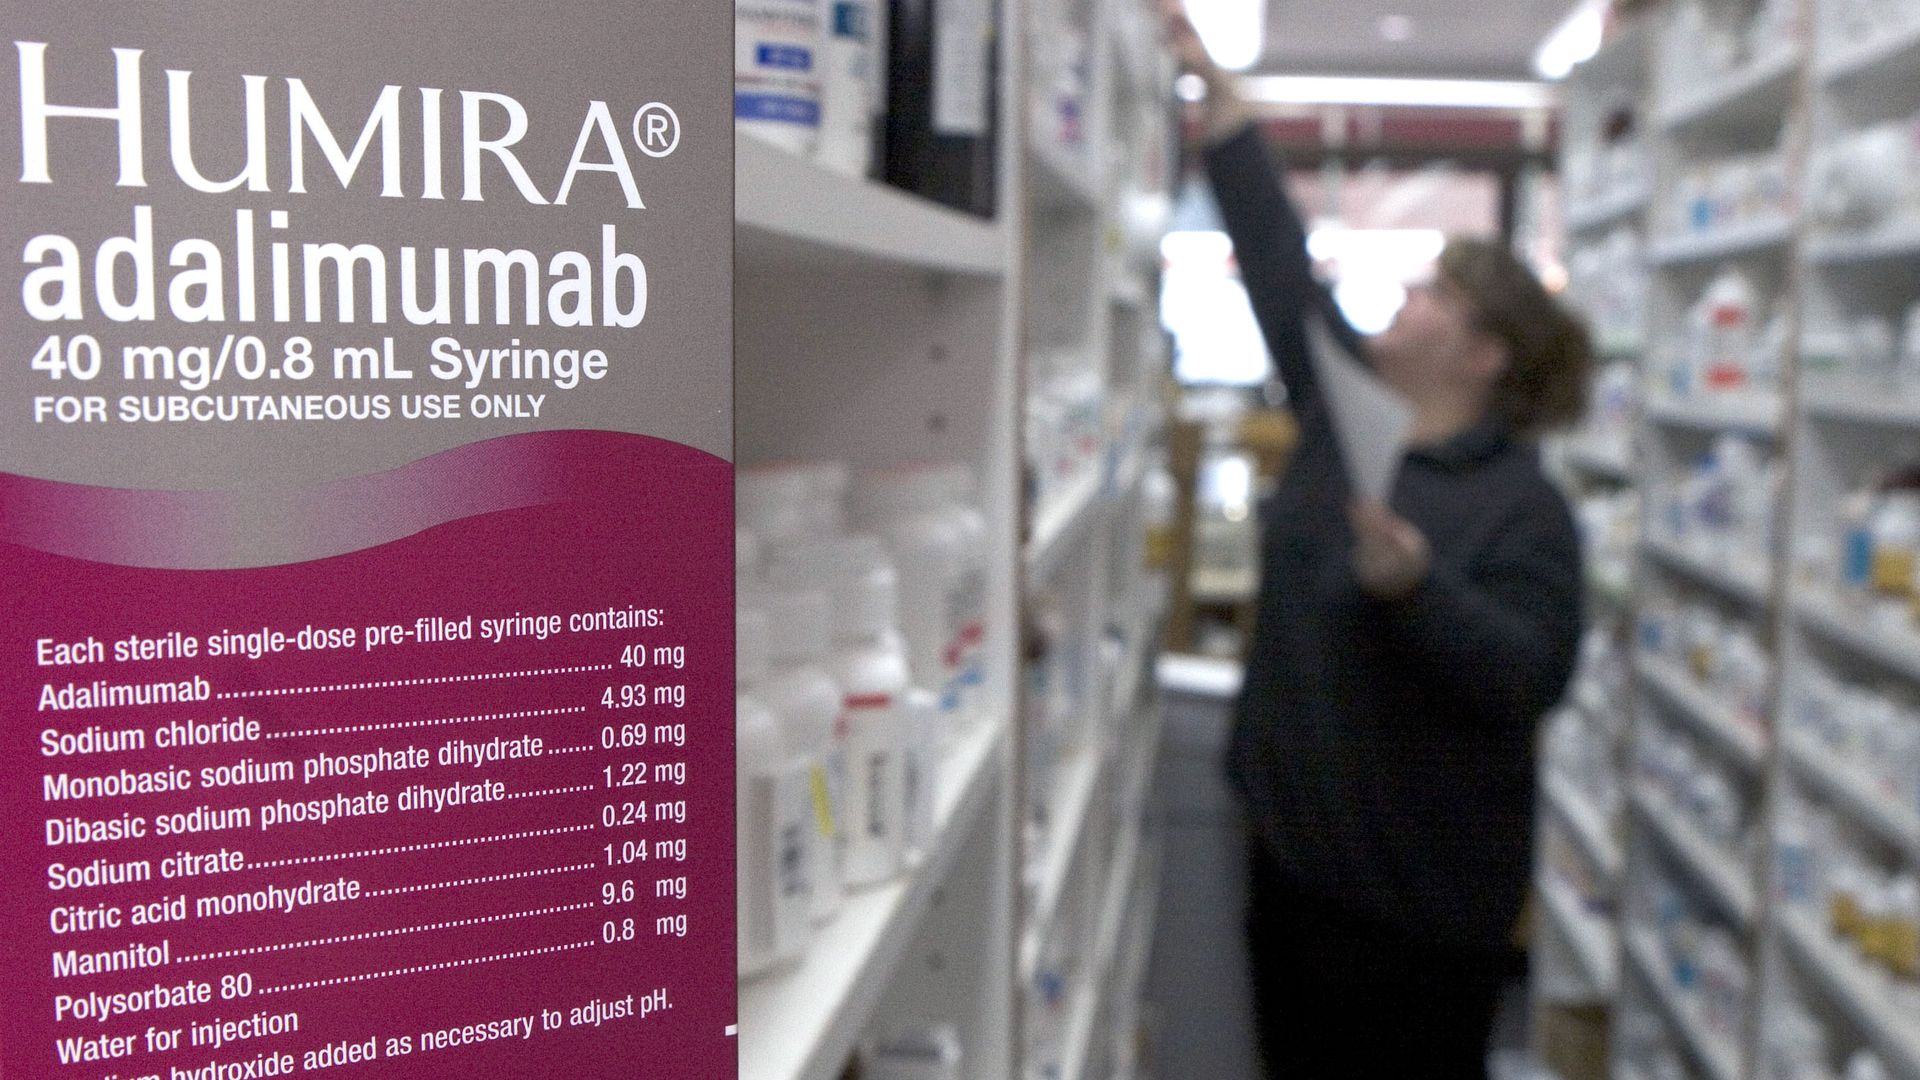 The prescription drug Humira is pictured inside a pharmacy.